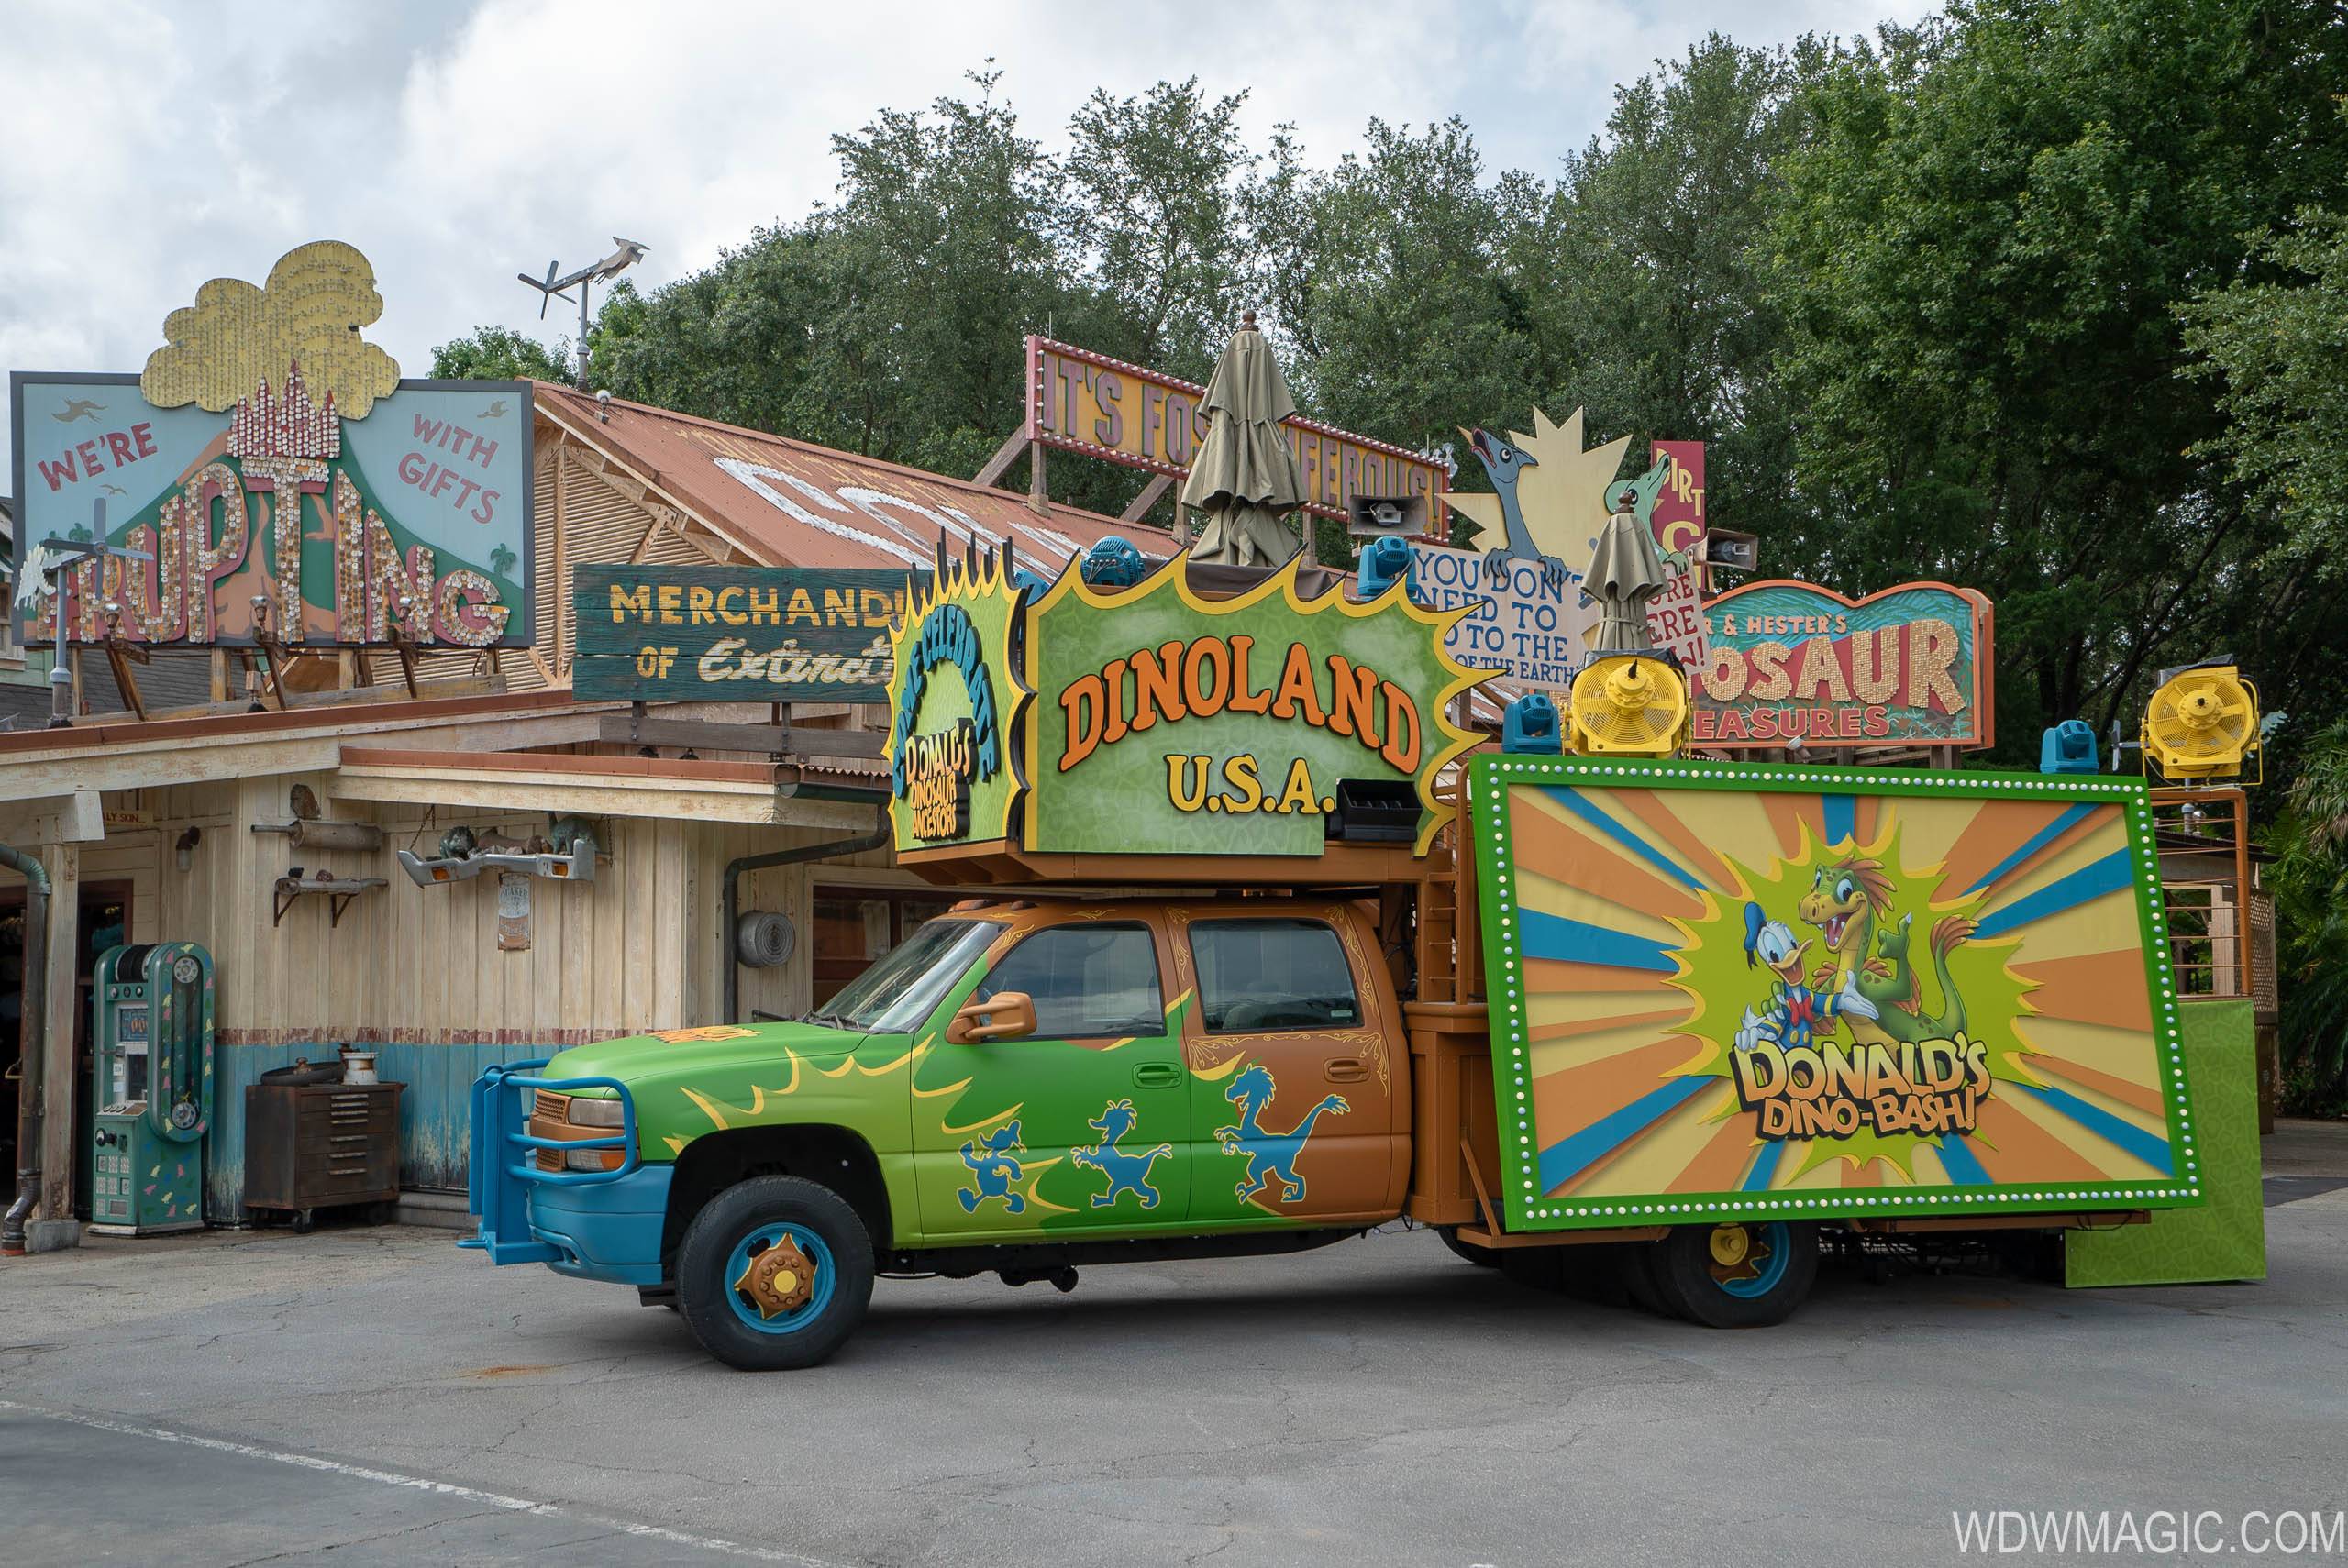 PHOTOS - Donald's Dino-Bash! brings new meet and greets and dance party to Disney's Animal Kingdom